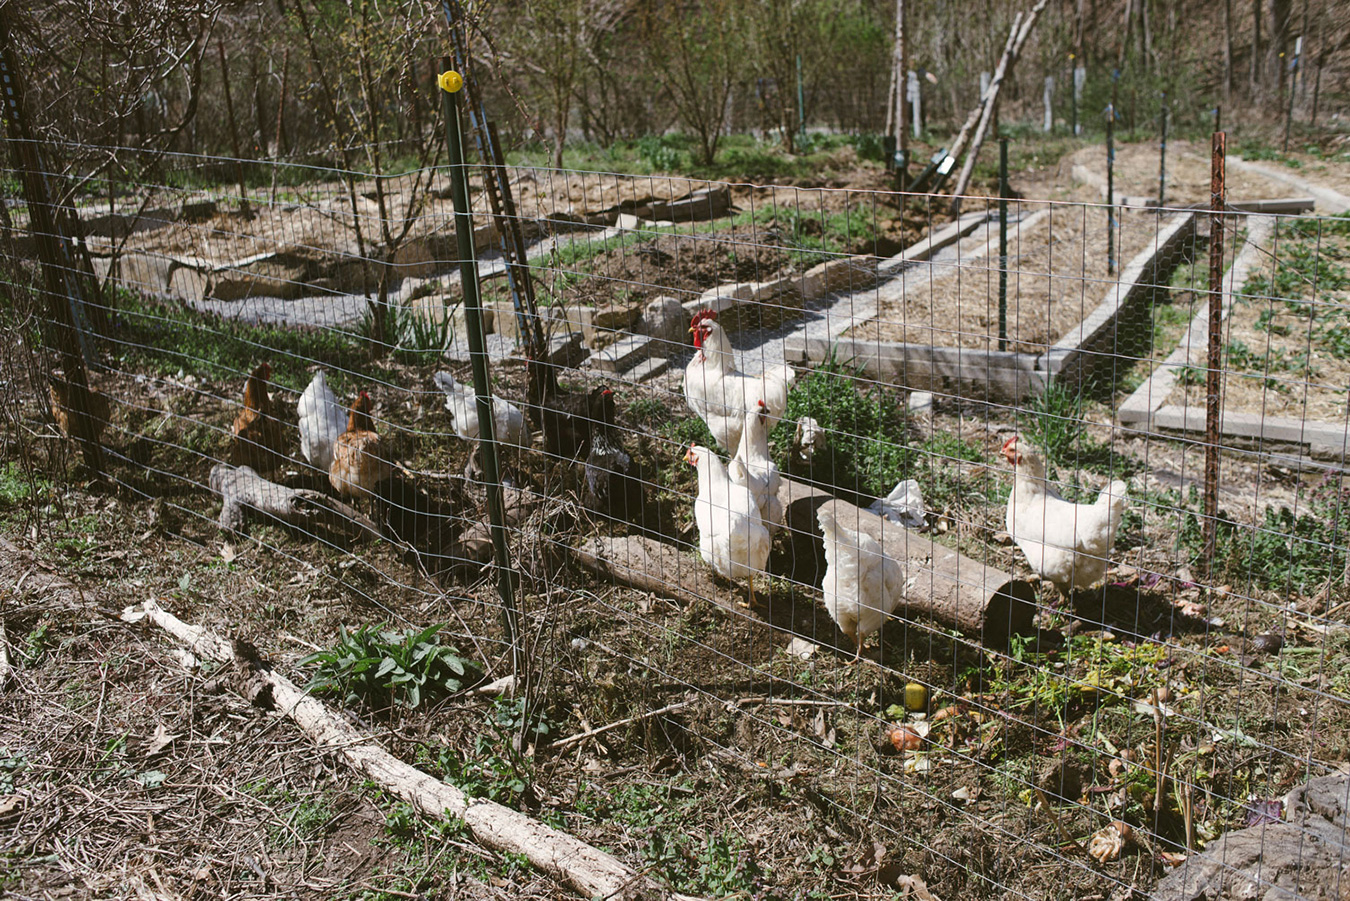 Salem Willard built a double fence around his garden beds that functions as both a run for chickens and ducks and a compost area. | Photo by Natasha Komoda